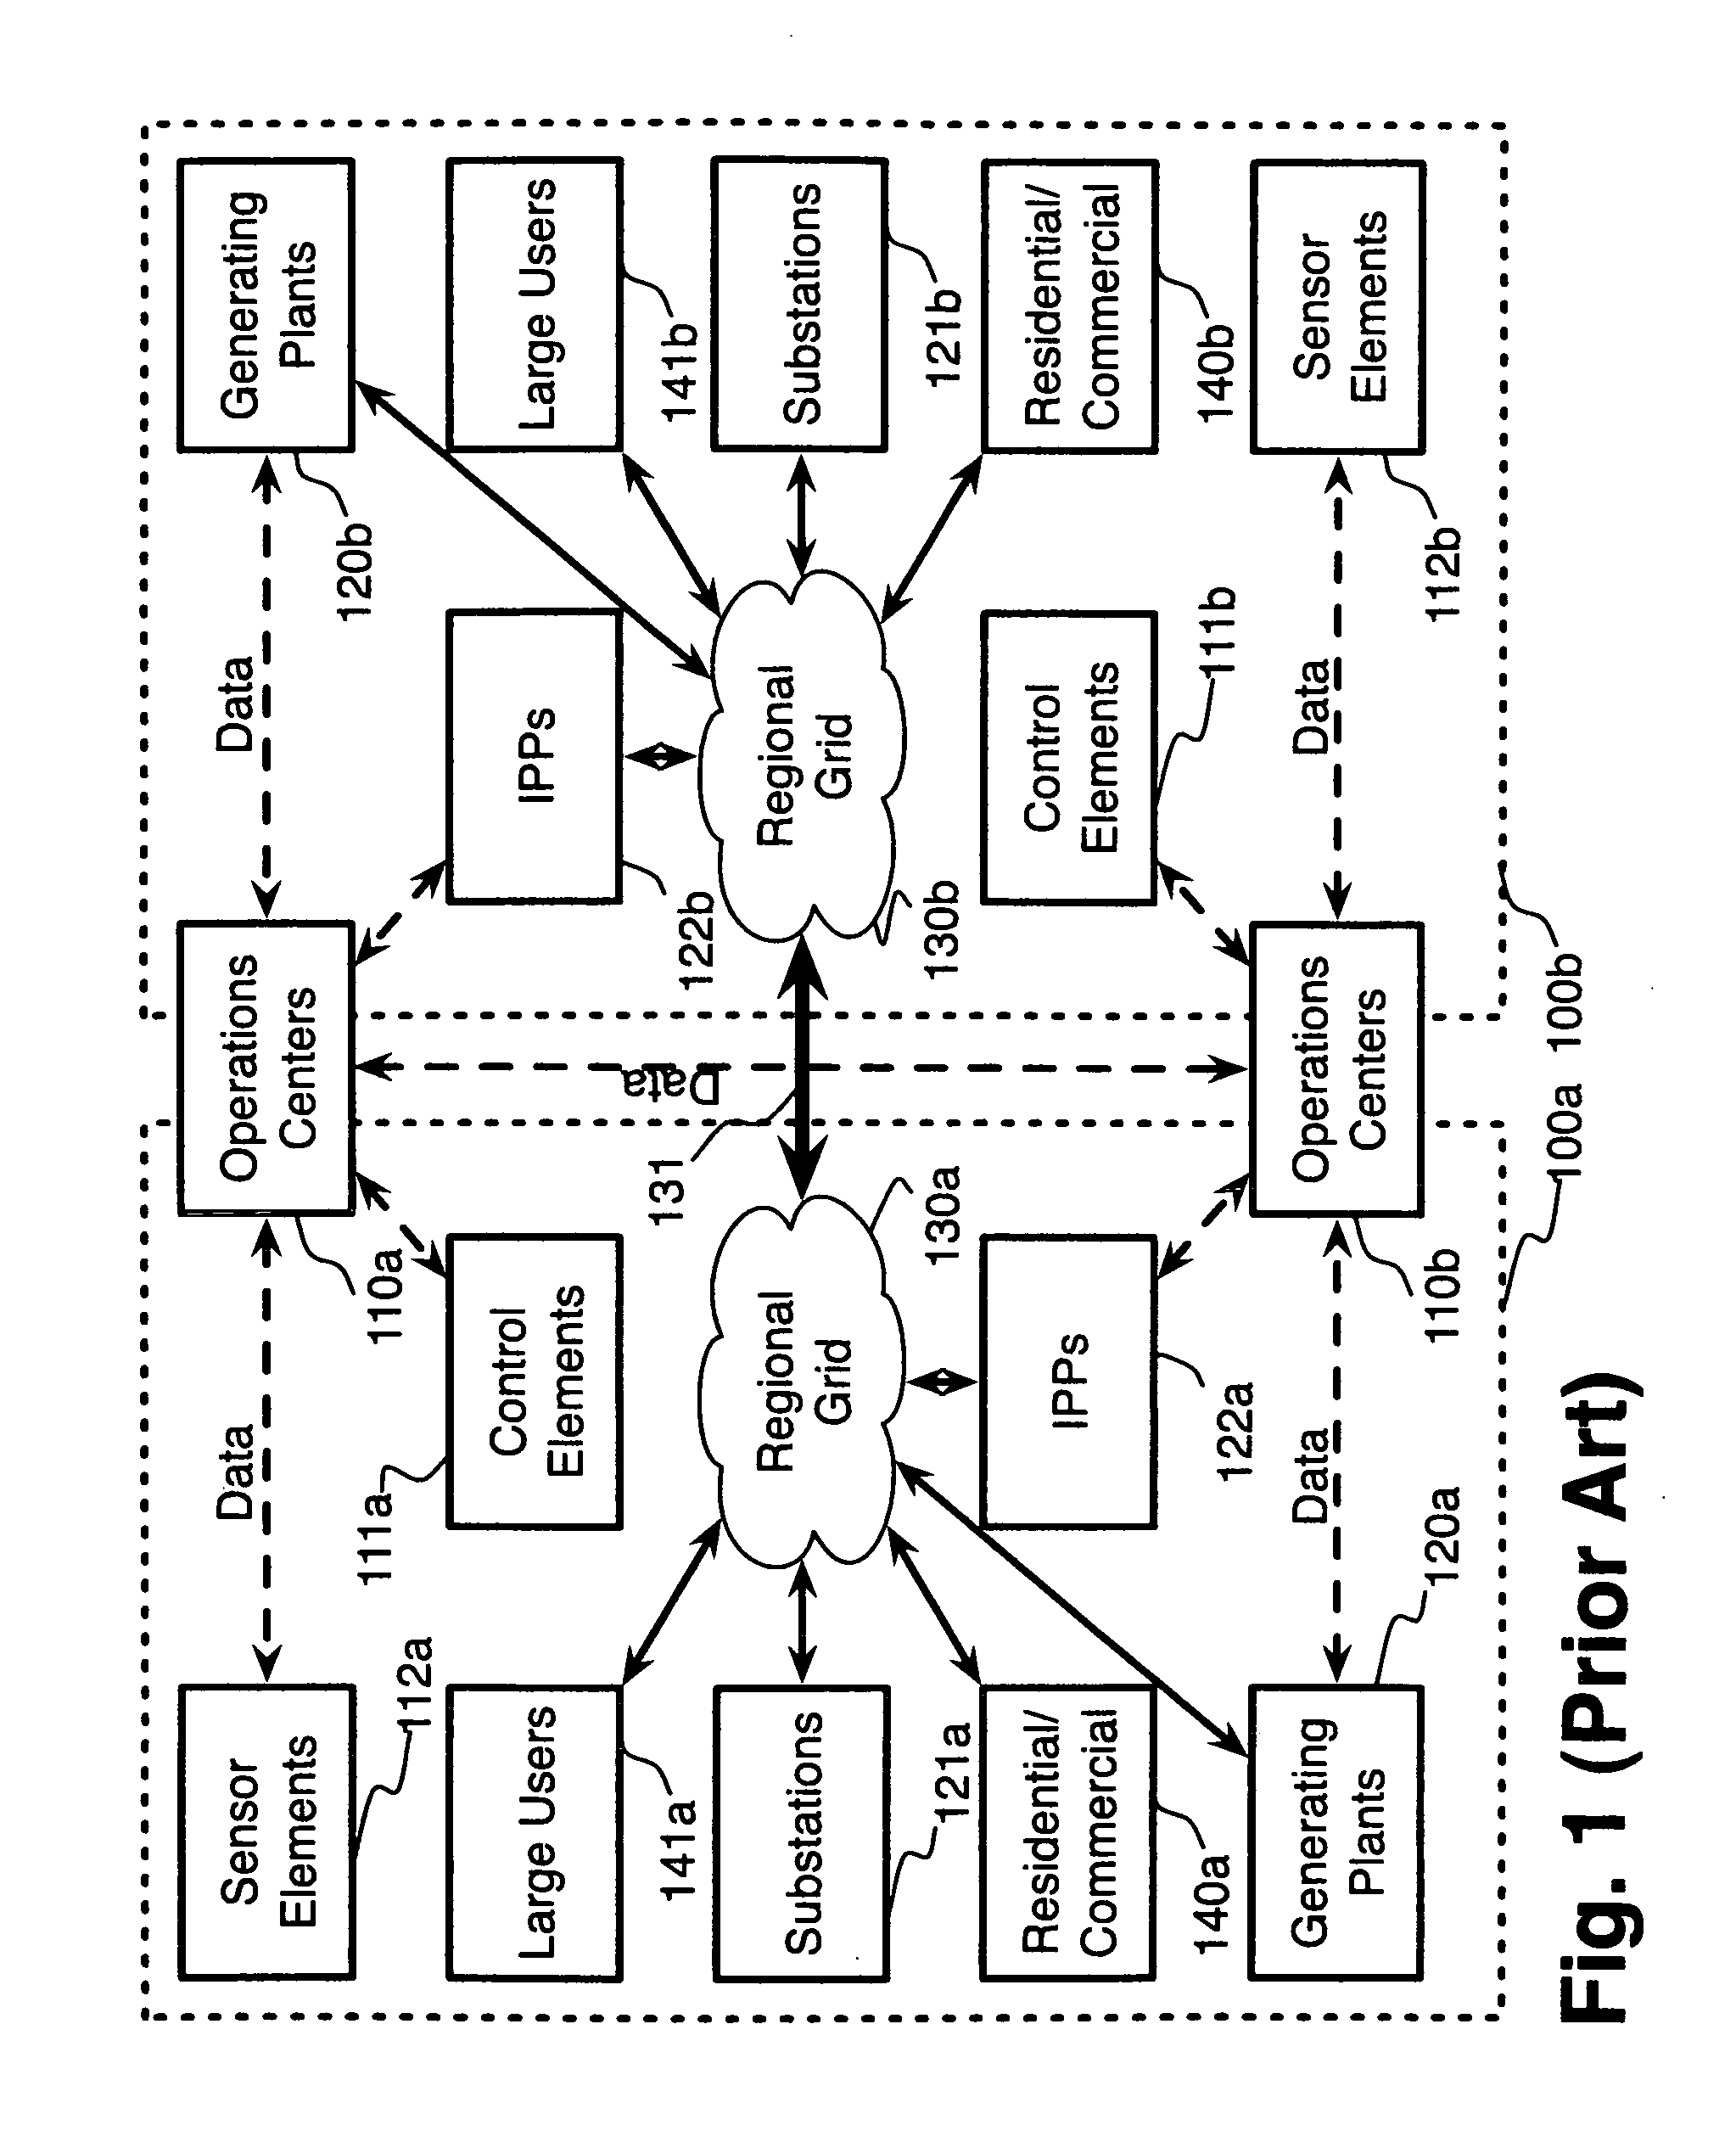 System and method for single-action energy resource scheduling and participation in energy-related securities